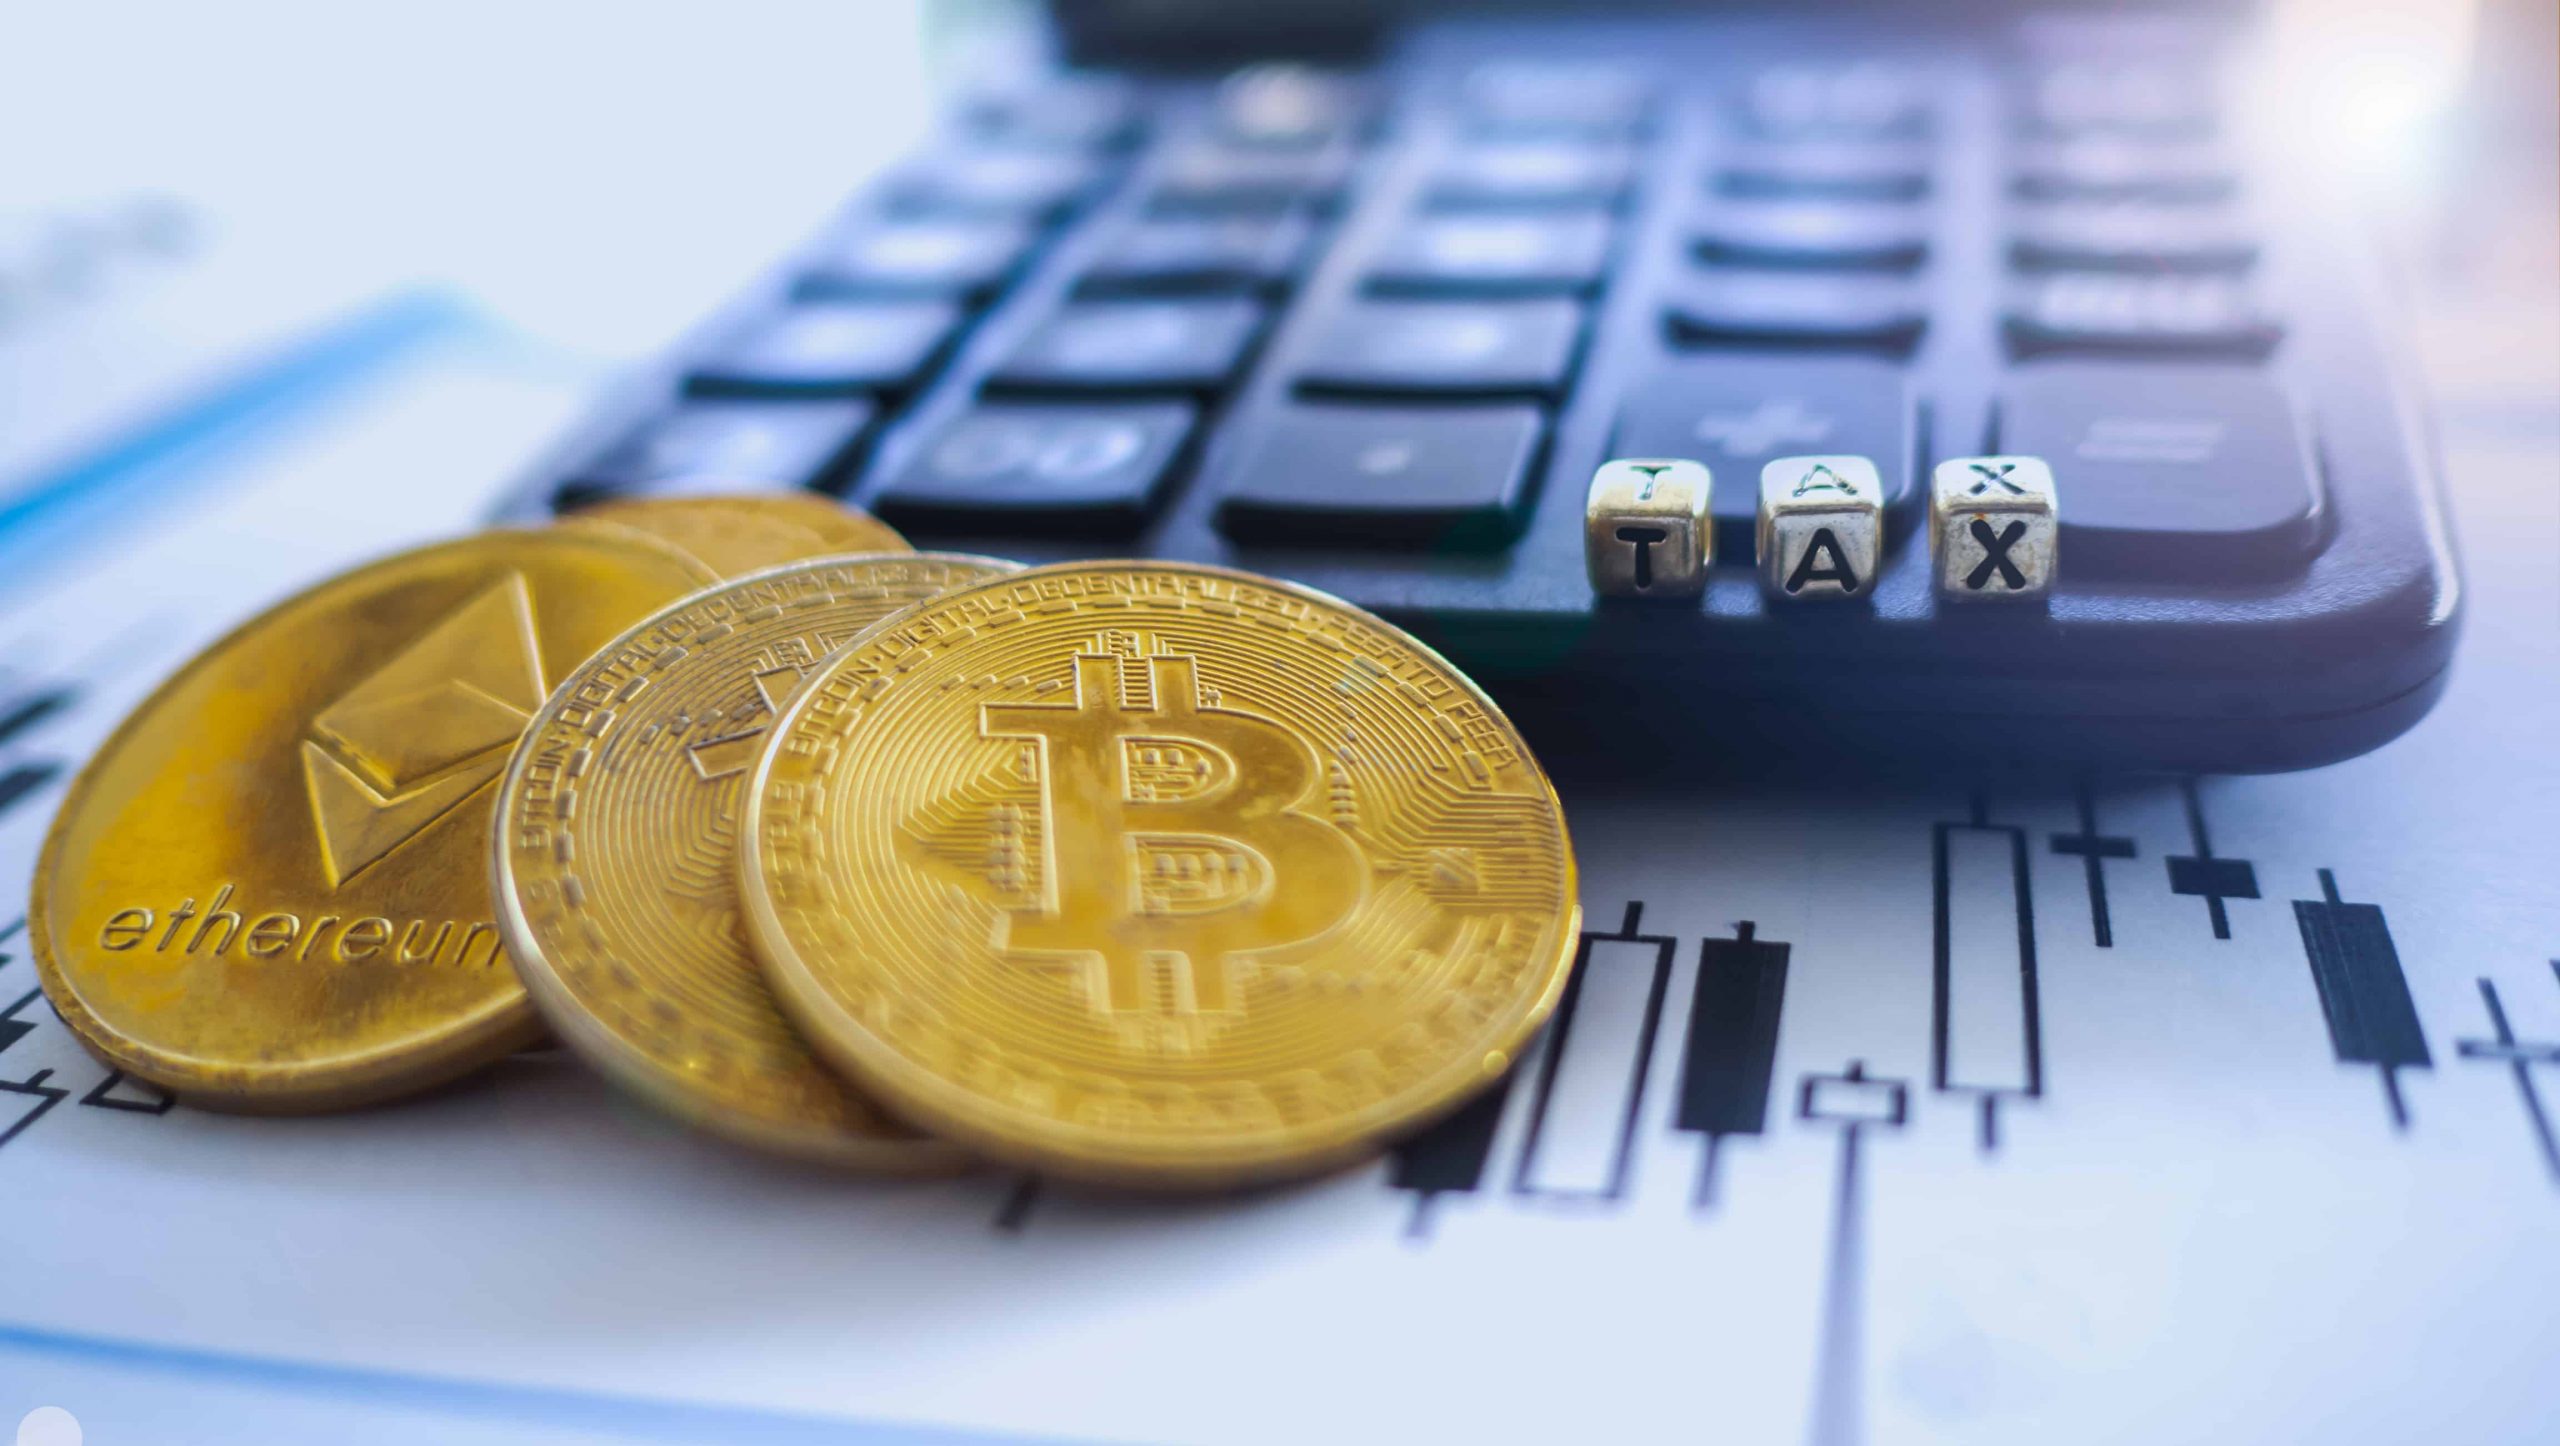 limit on crypto currency for taxes